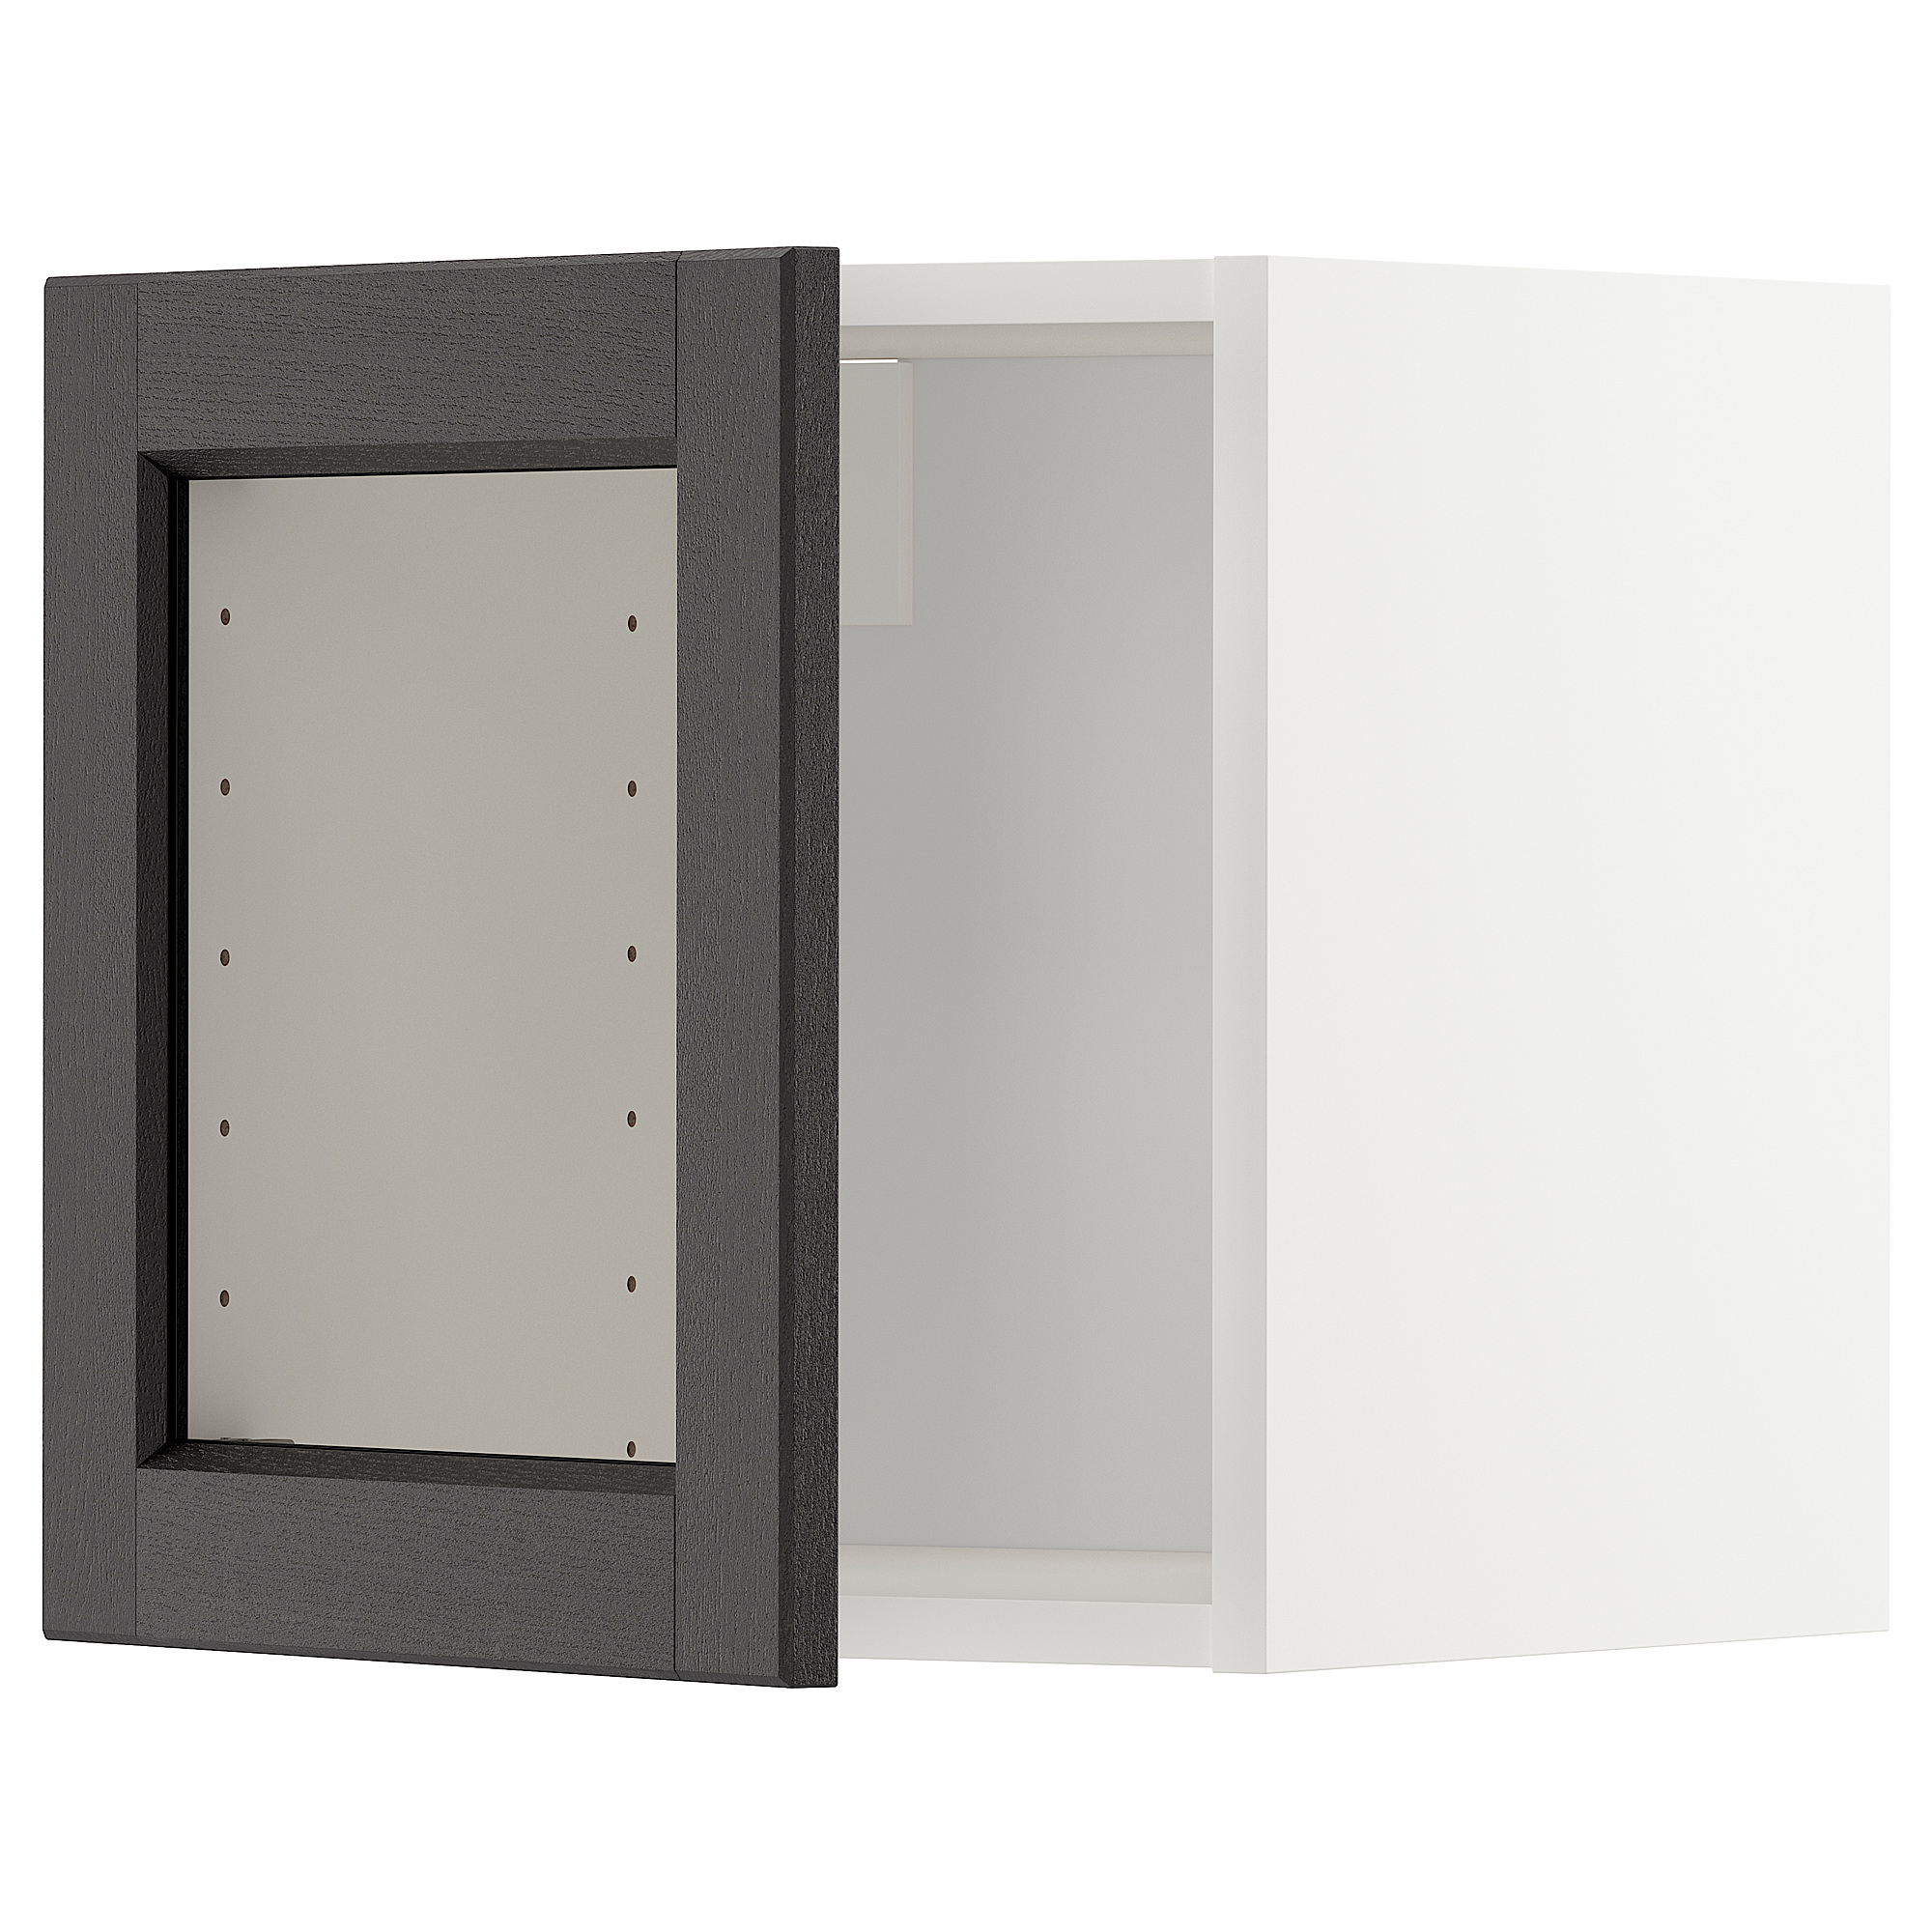 METOD wall cabinet with glass door